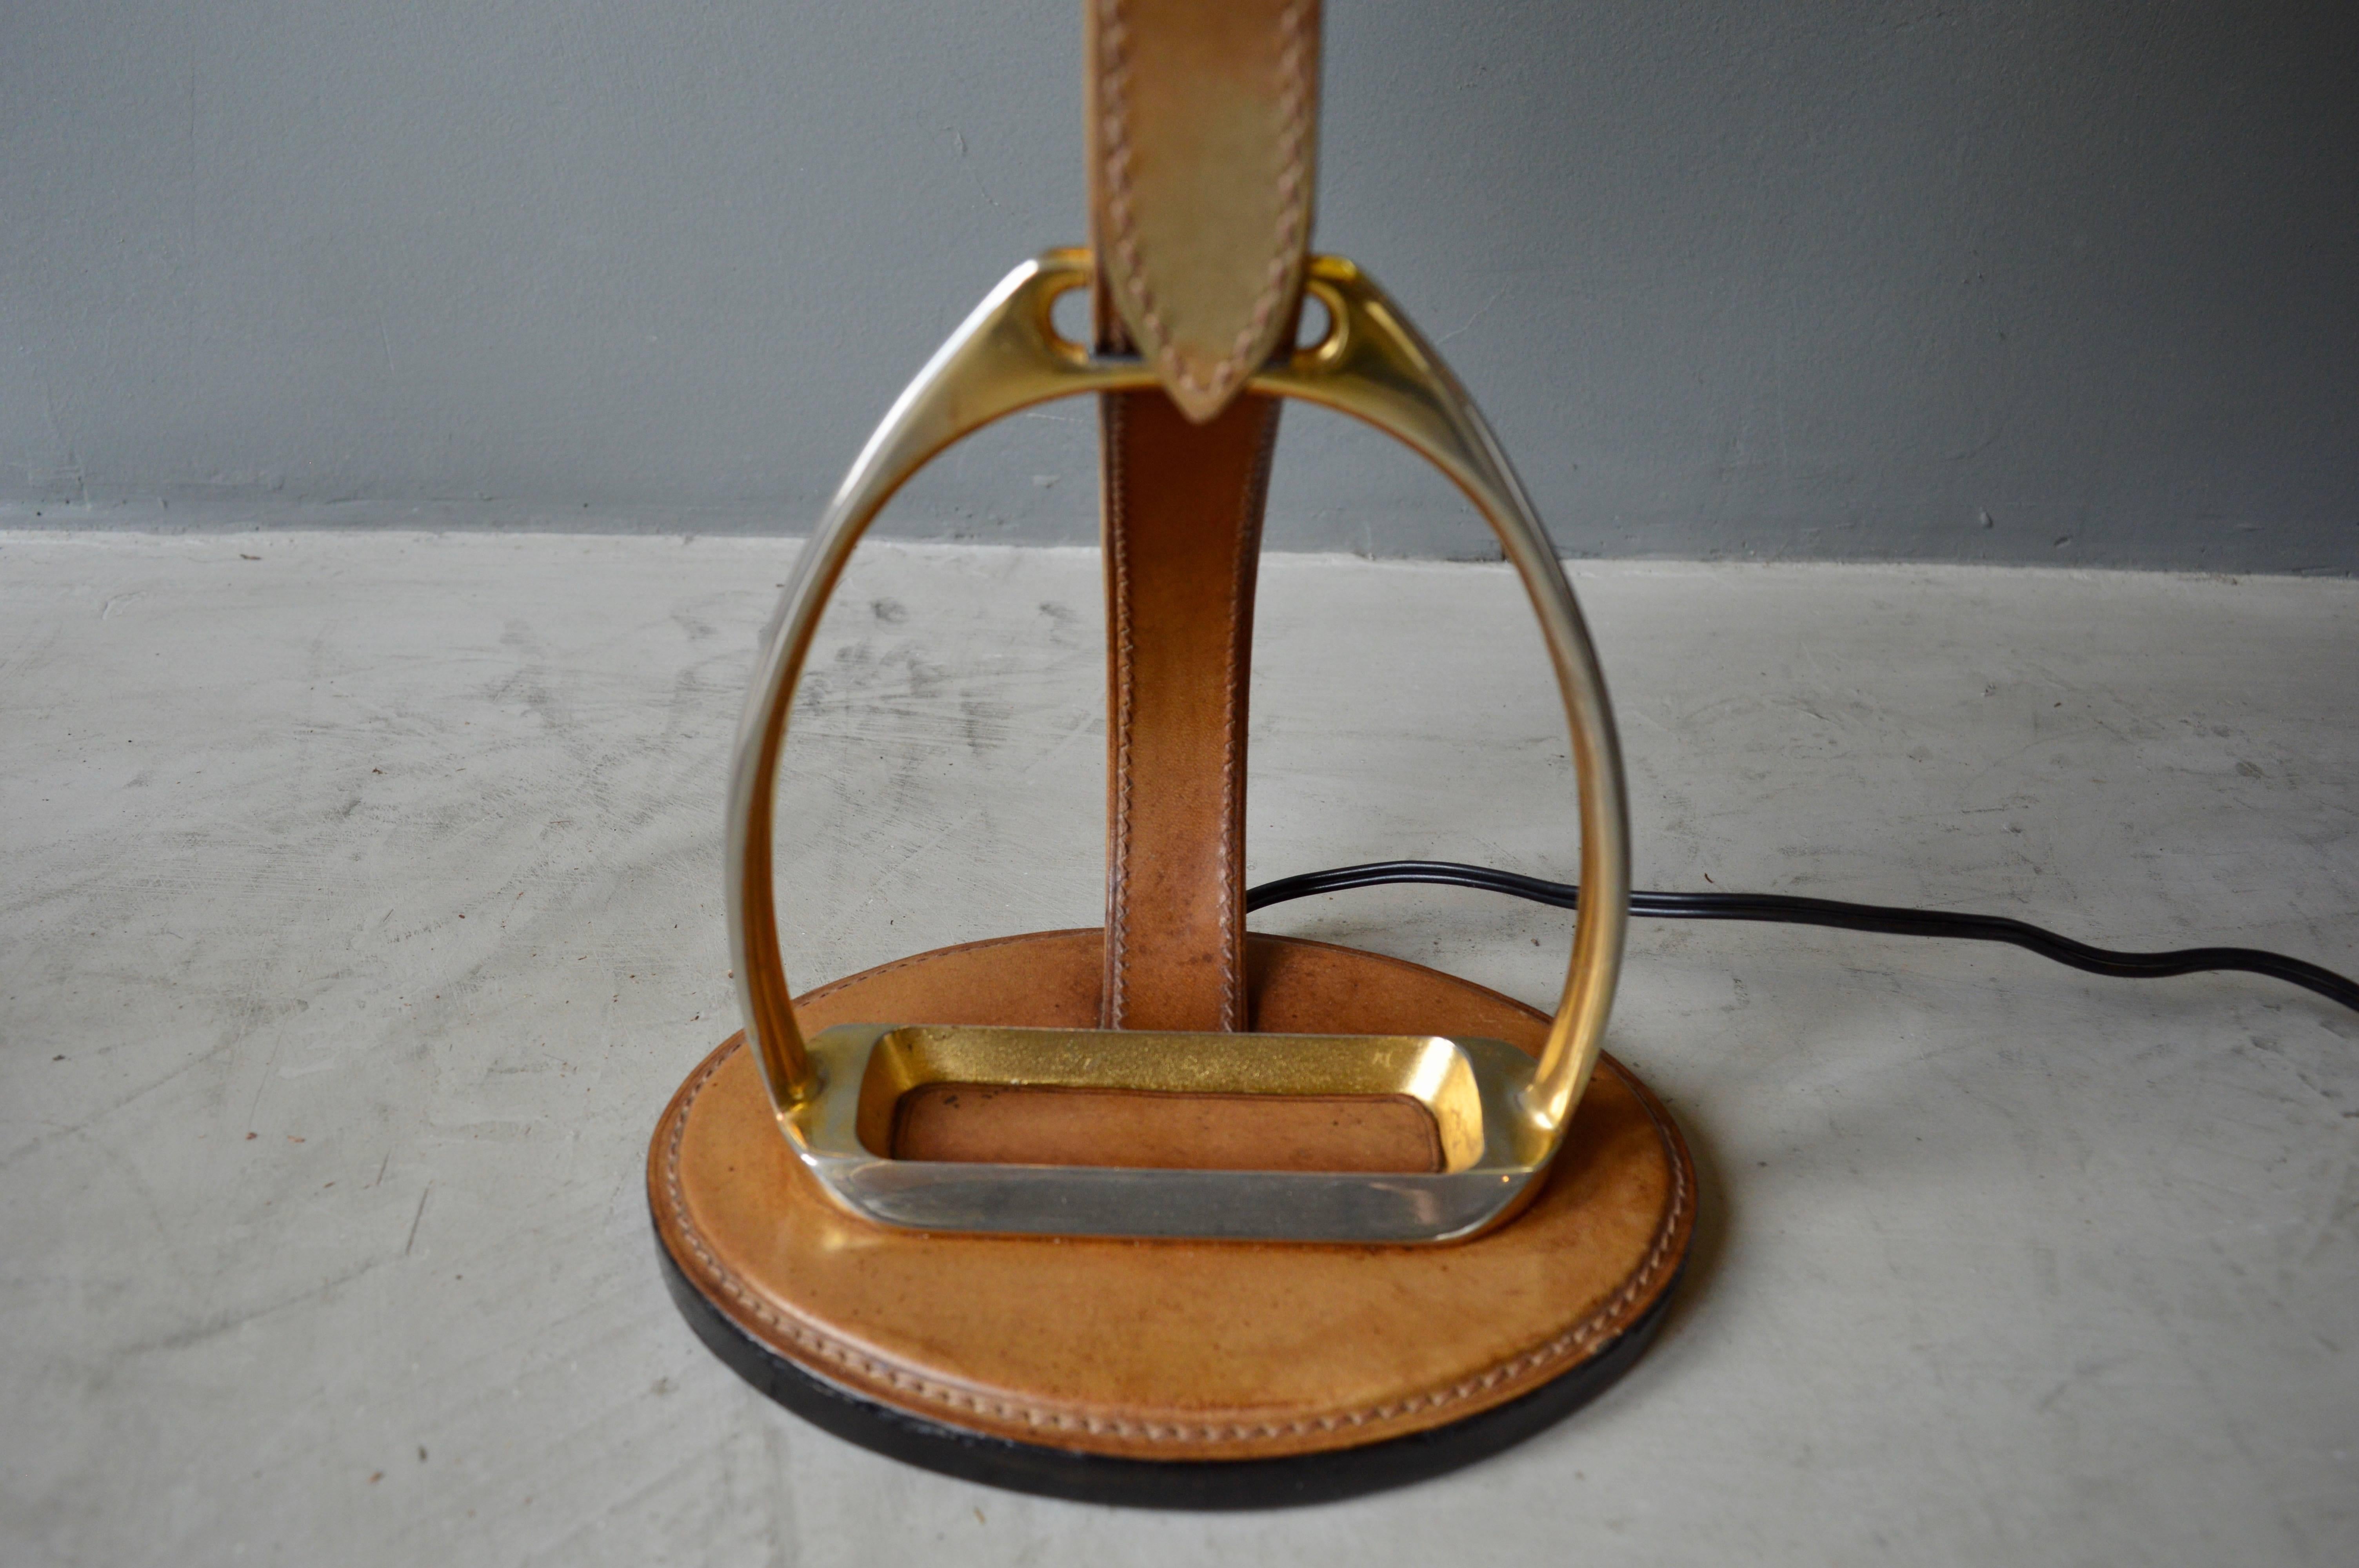 Handsome French and saddle leather table lamp by Longchamps, Paris. Great patina to brass and saddle leather. Newly rewired. Excellent vintage condition. New shade.